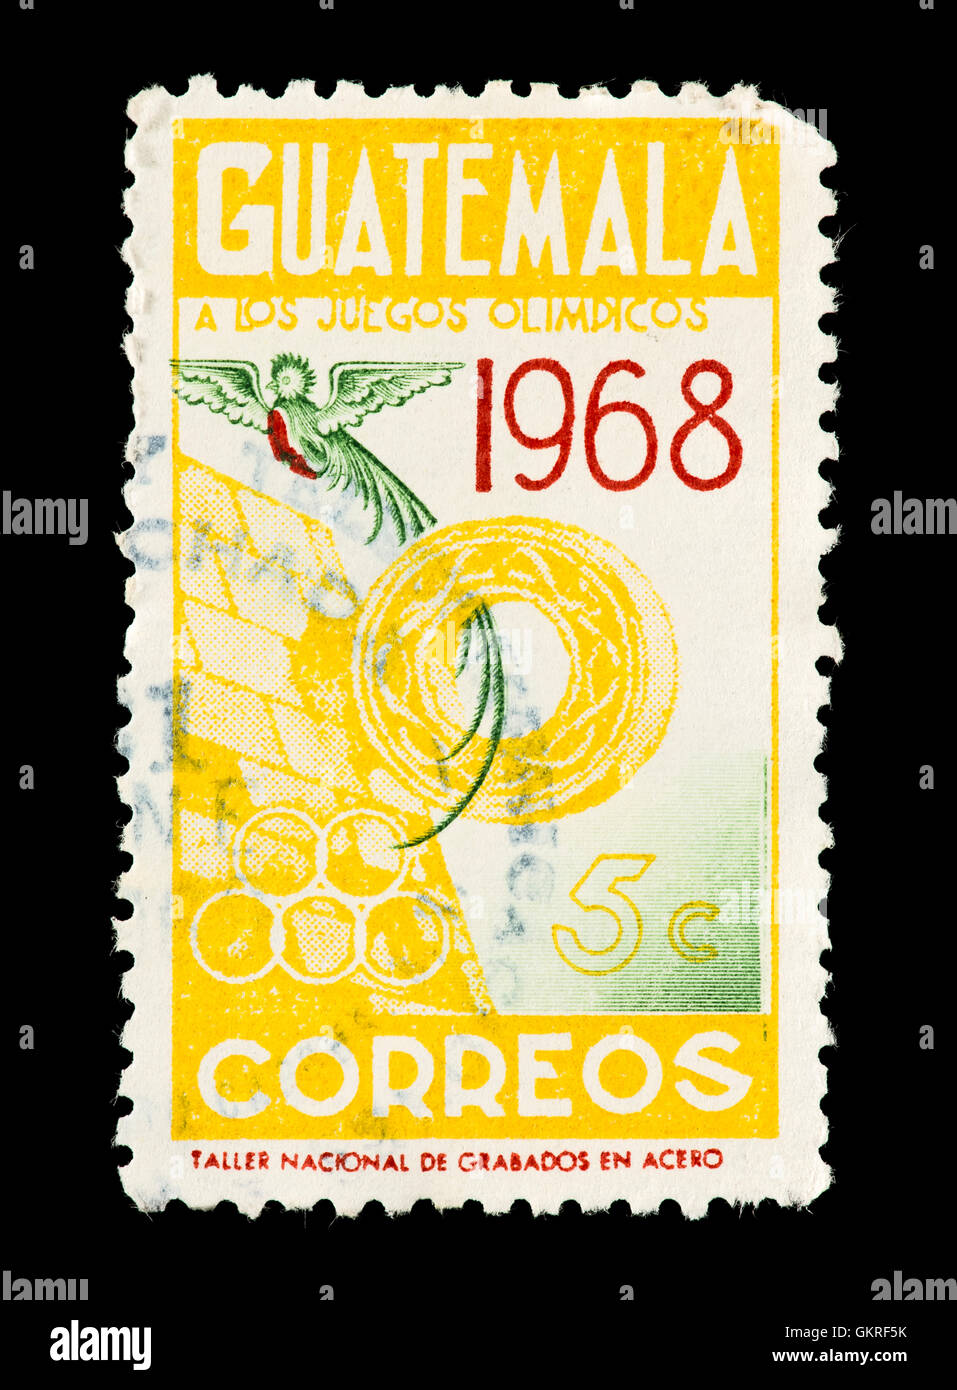 Postage stamp from Guatemala depicting a quetzal and Mayan Ball game goal, for the 1968 Summer Olympic Games in Mexico City. Stock Photo